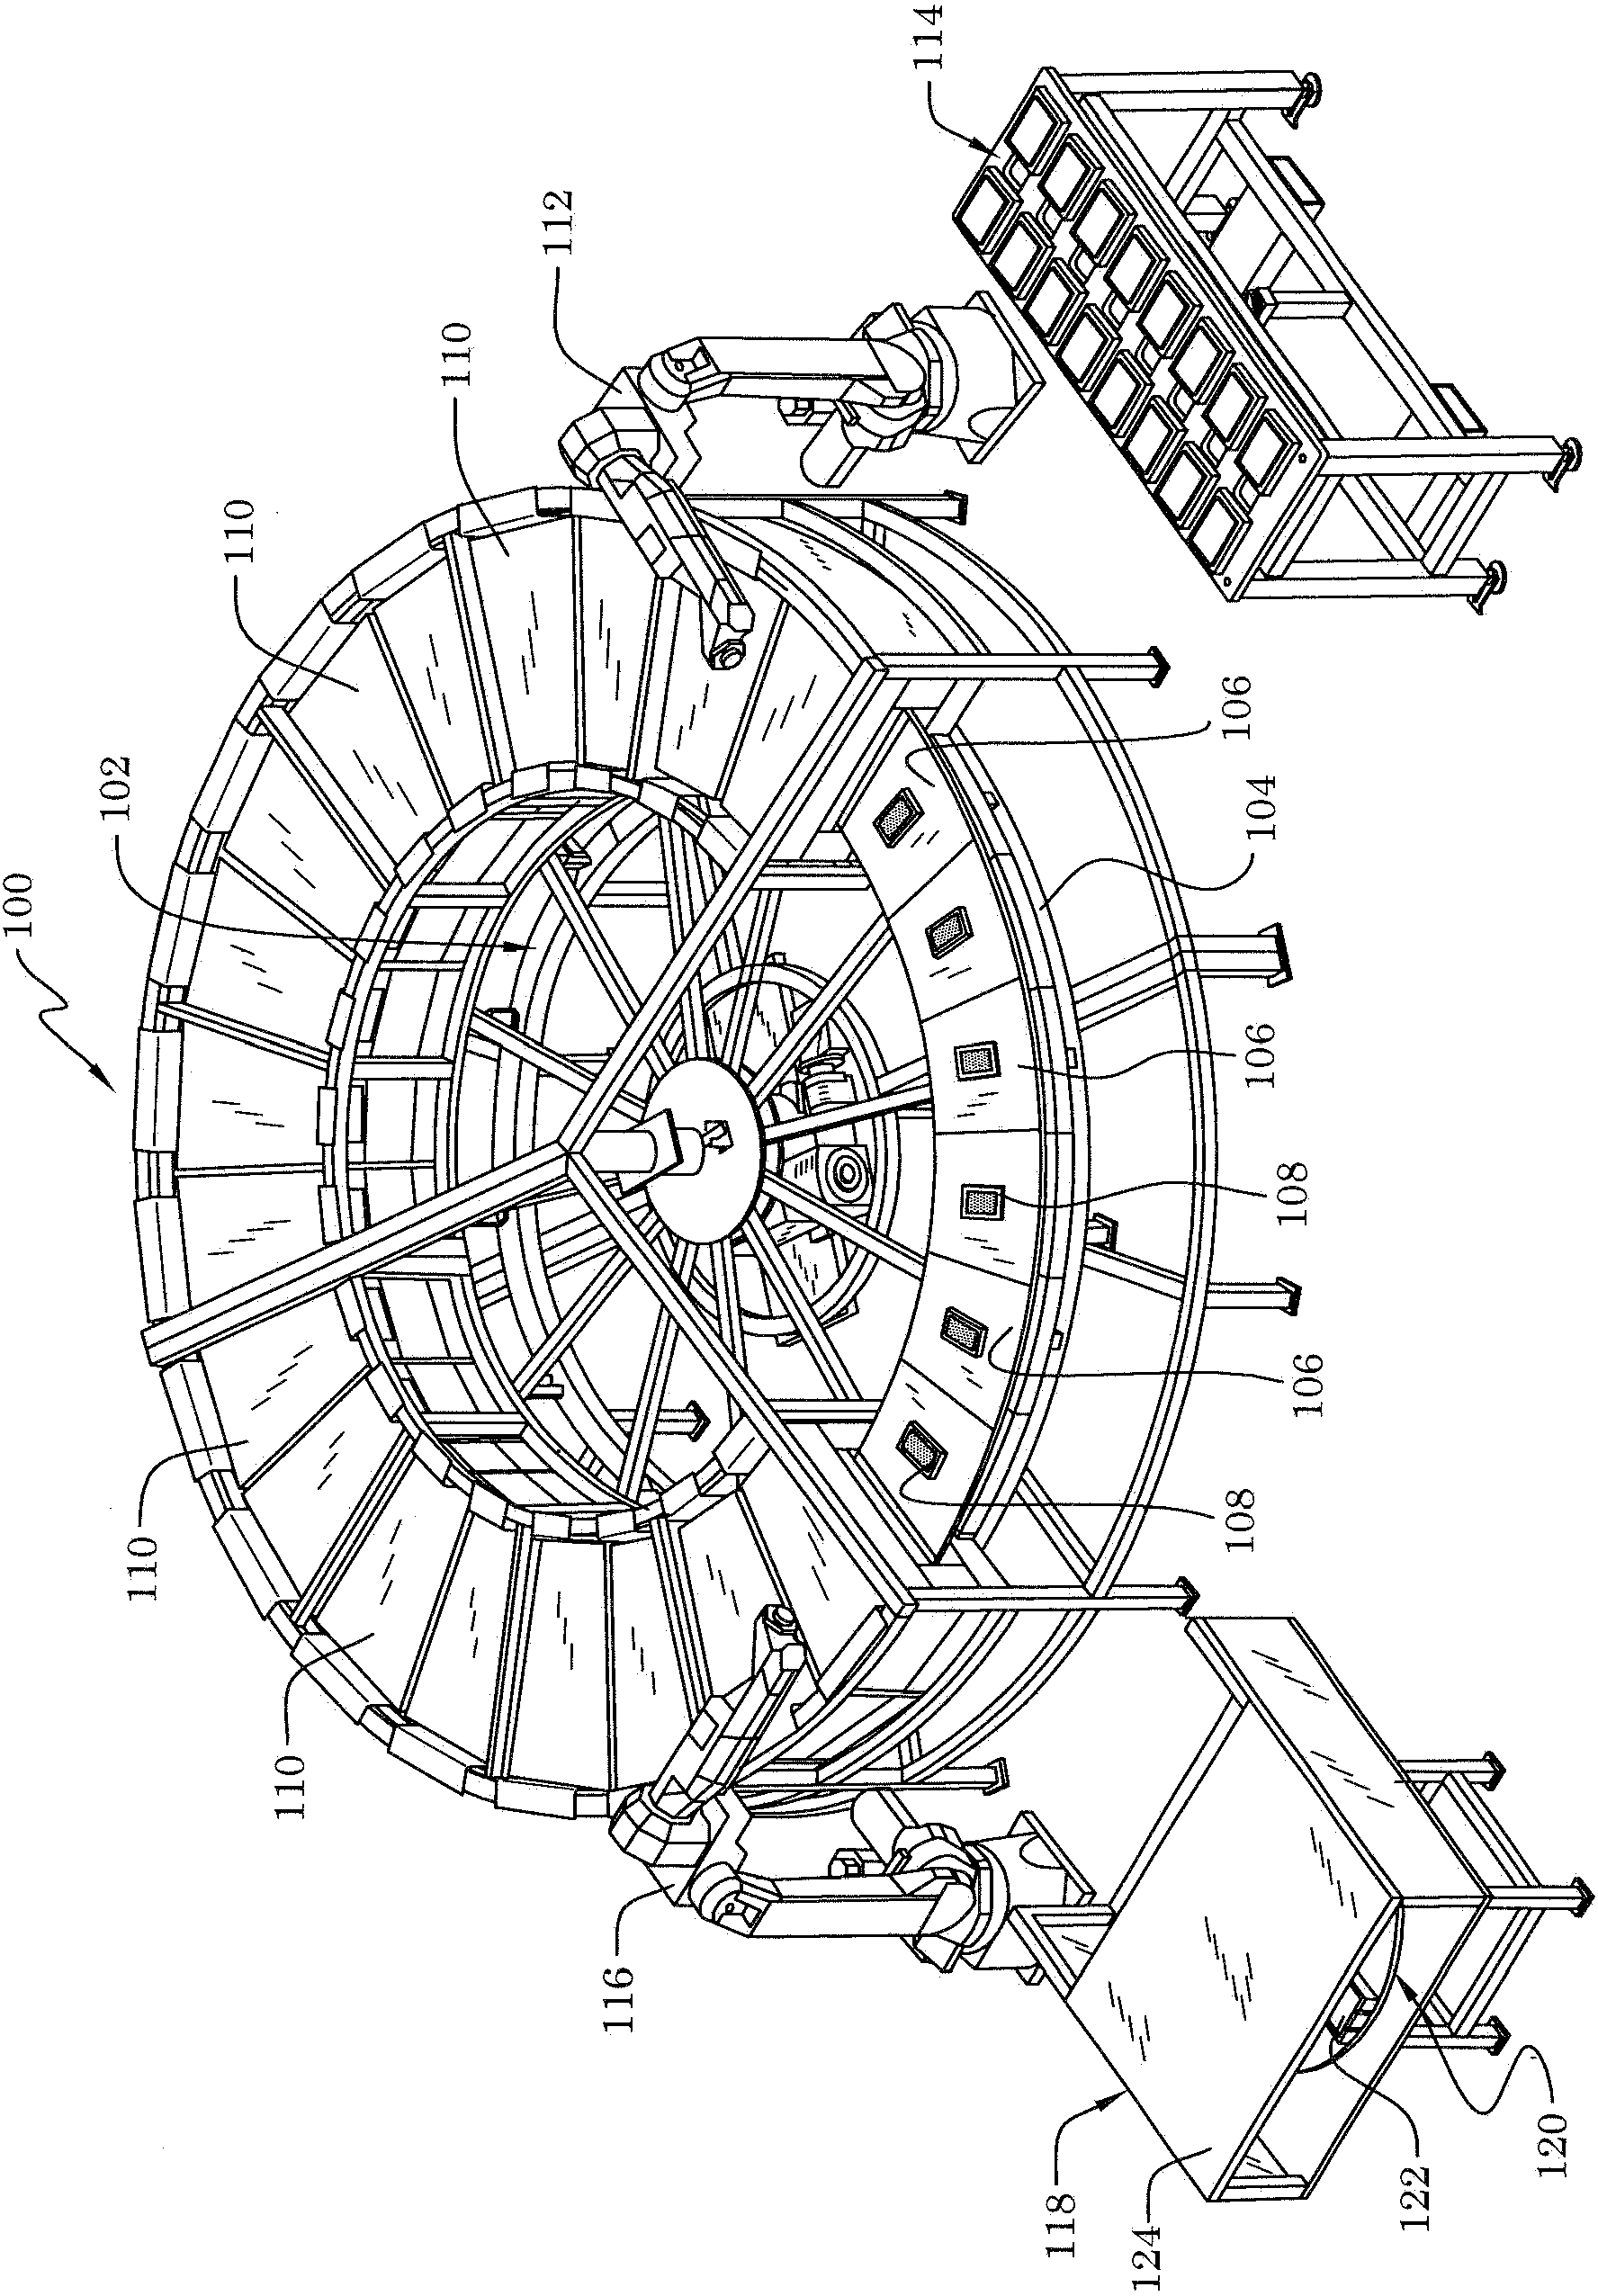 Glass molding system and related apparatus and method